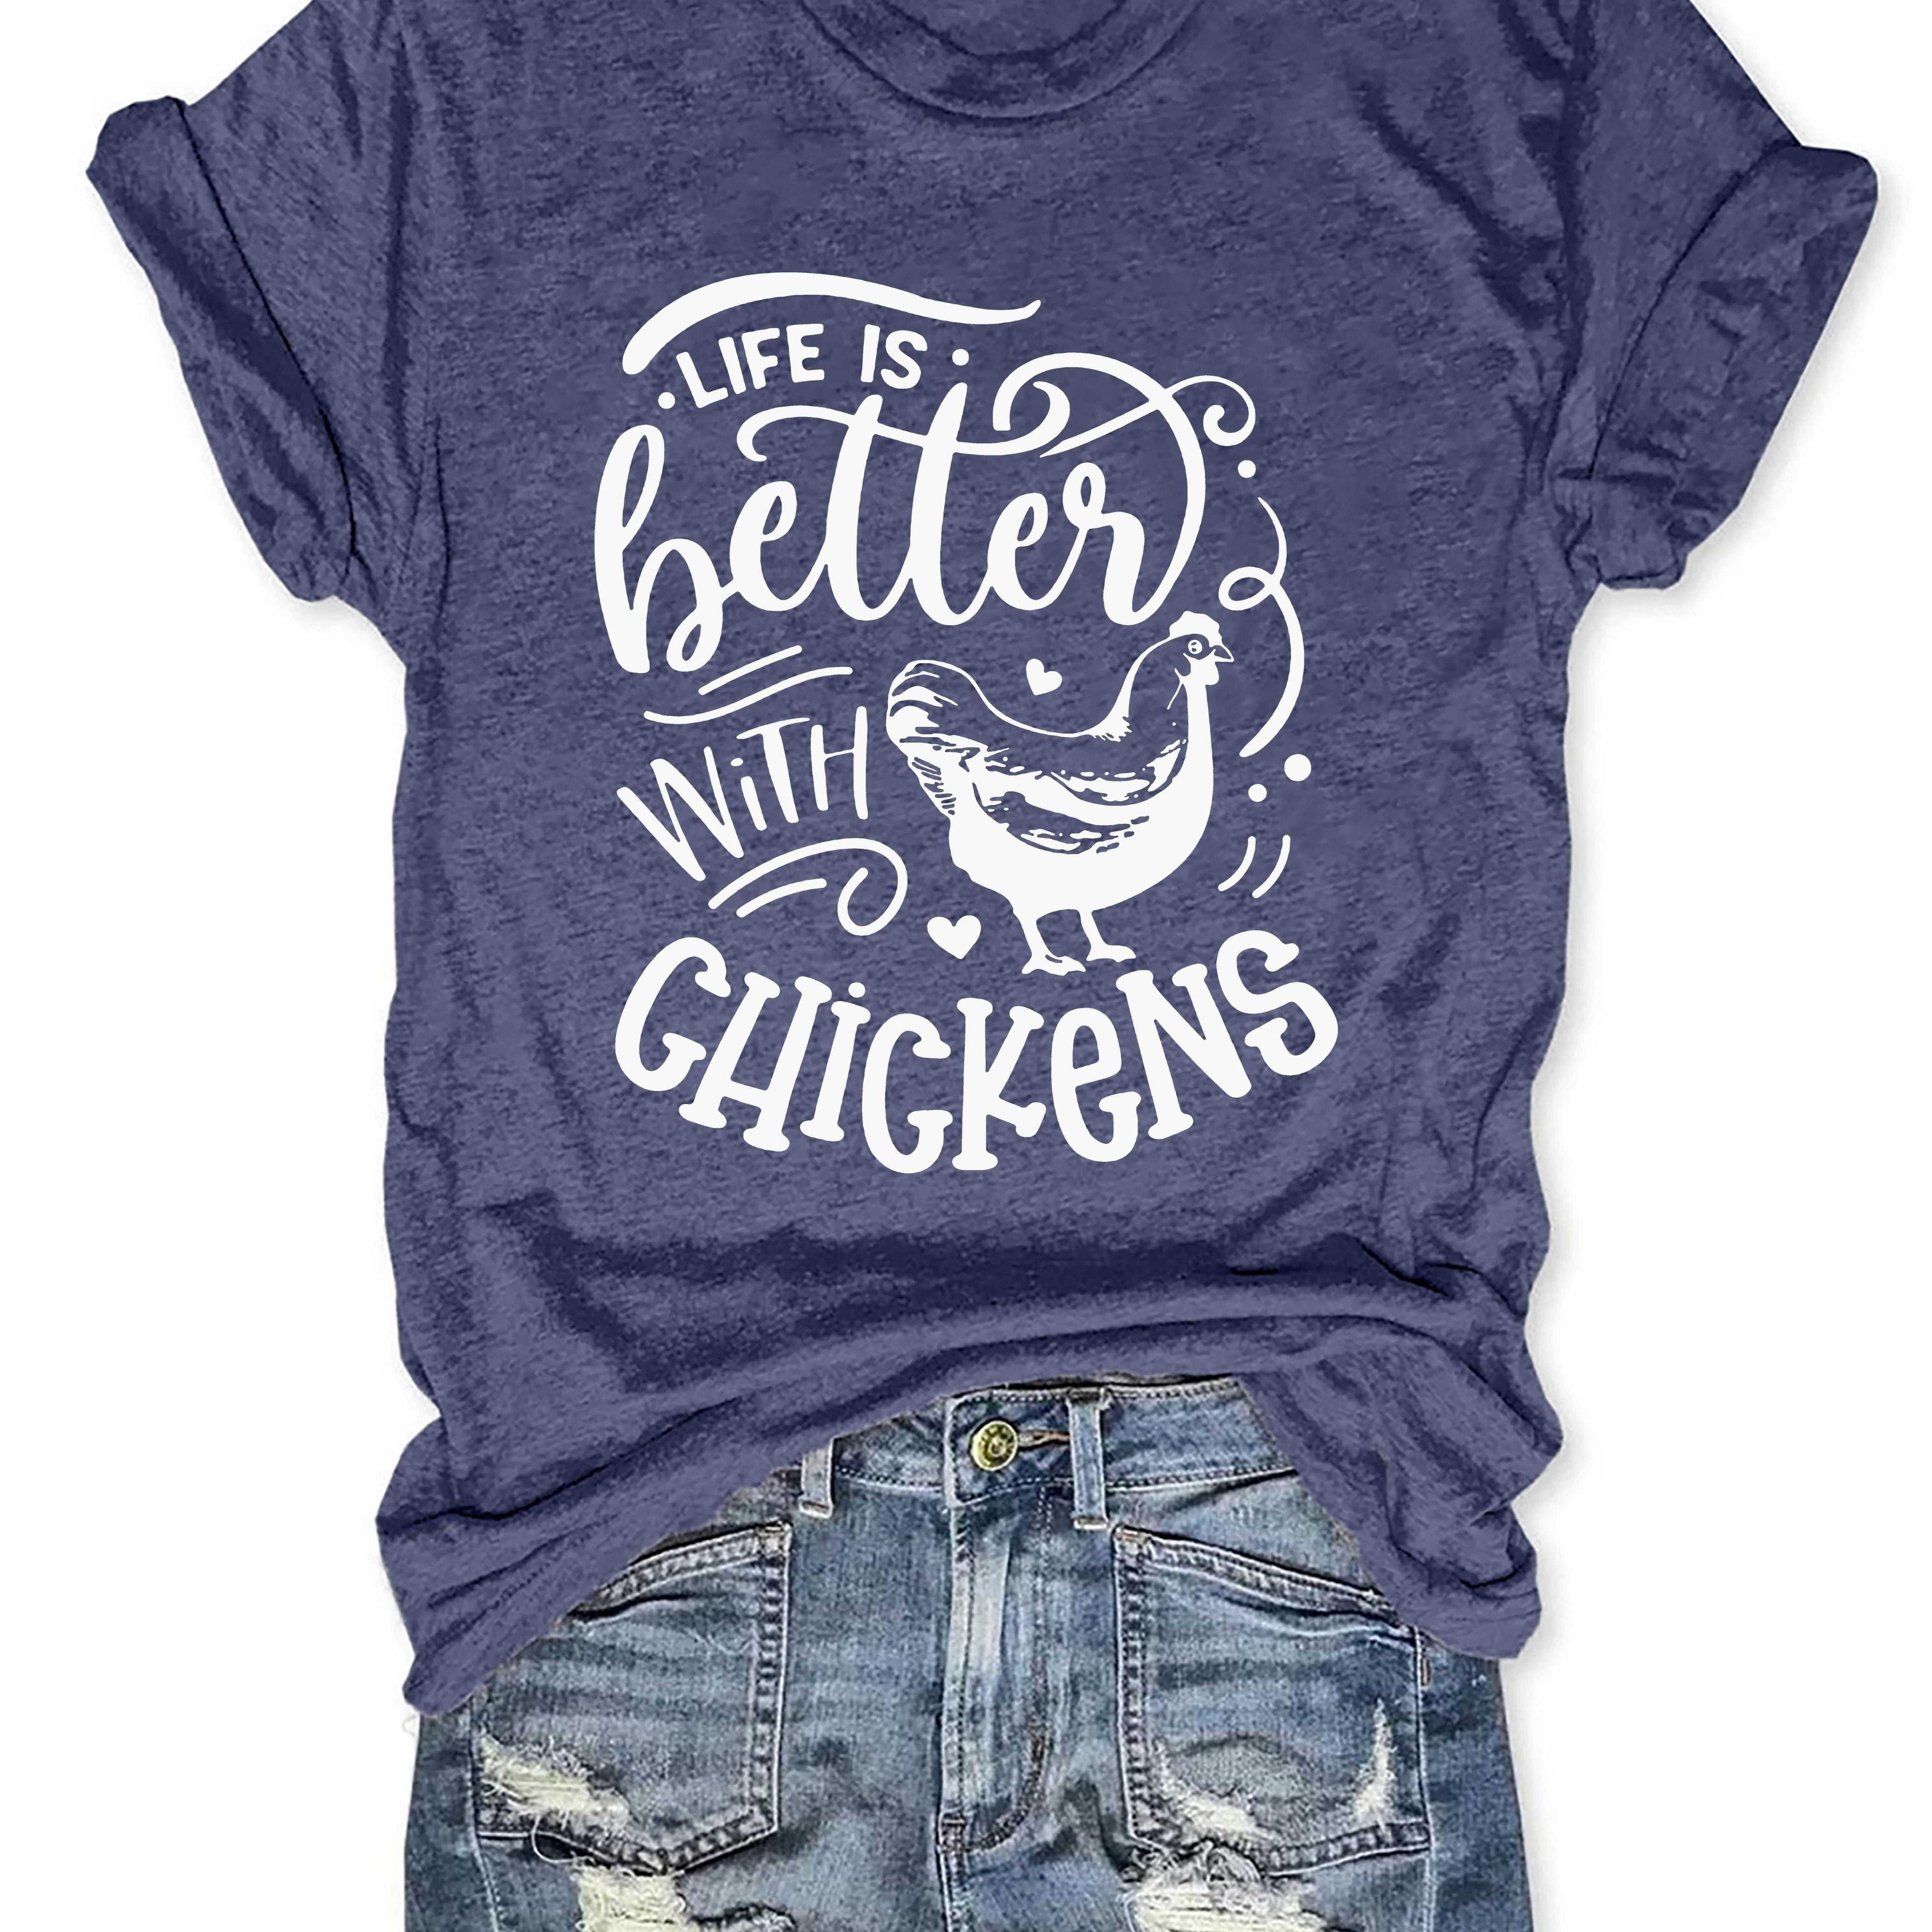 

Chicken & Heart Print T-shirt, Short Sleeve Crew Neck Casual Top For Summer & Spring, Women's Clothing